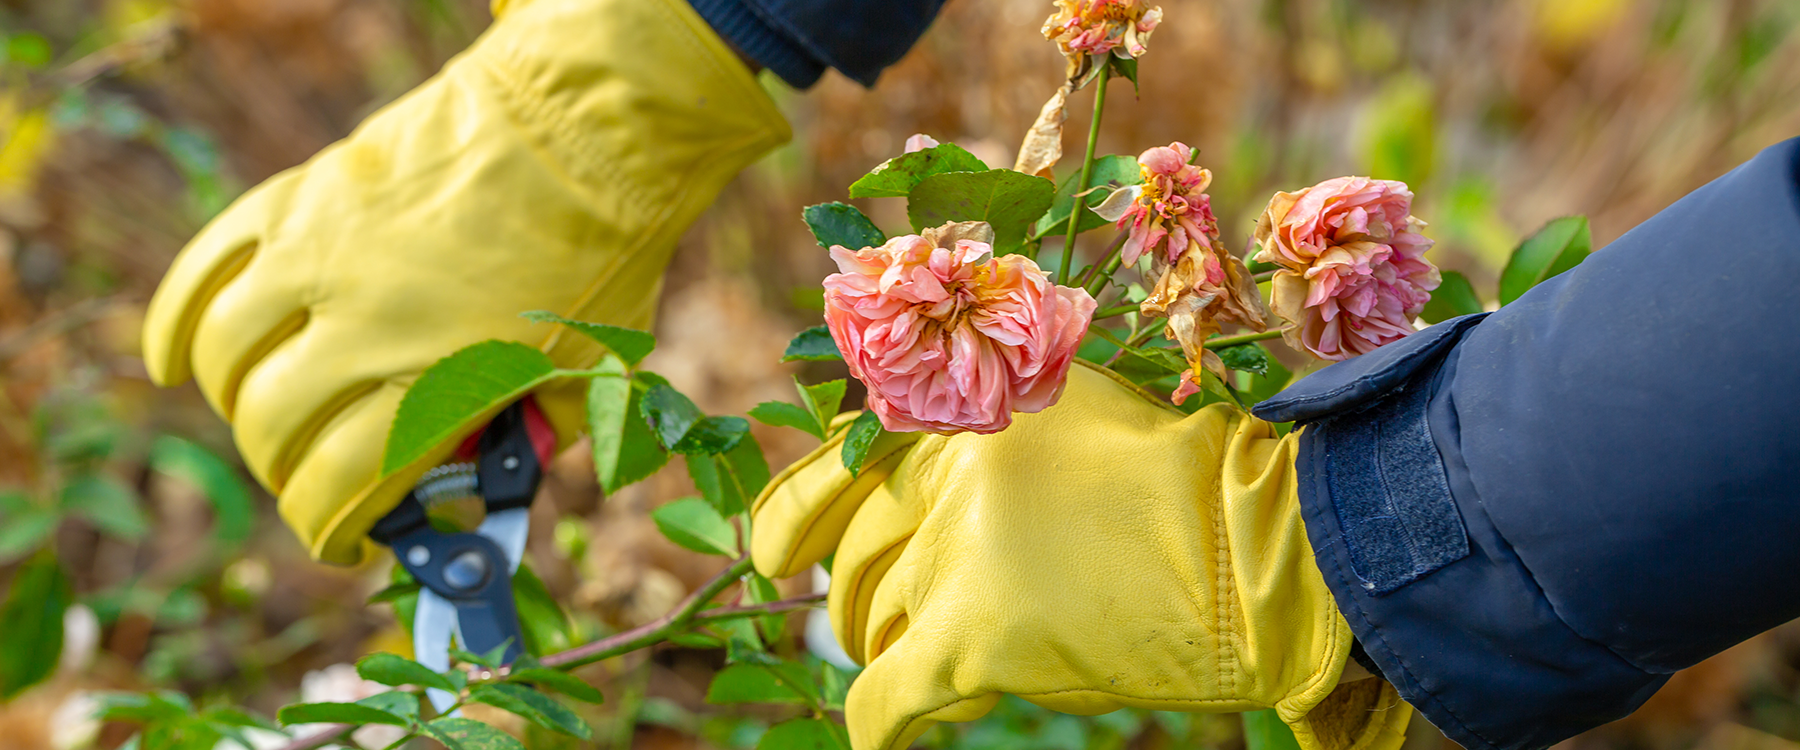 Deadhead Your Roses: How To Easily Deadhead Your Rose Bushes